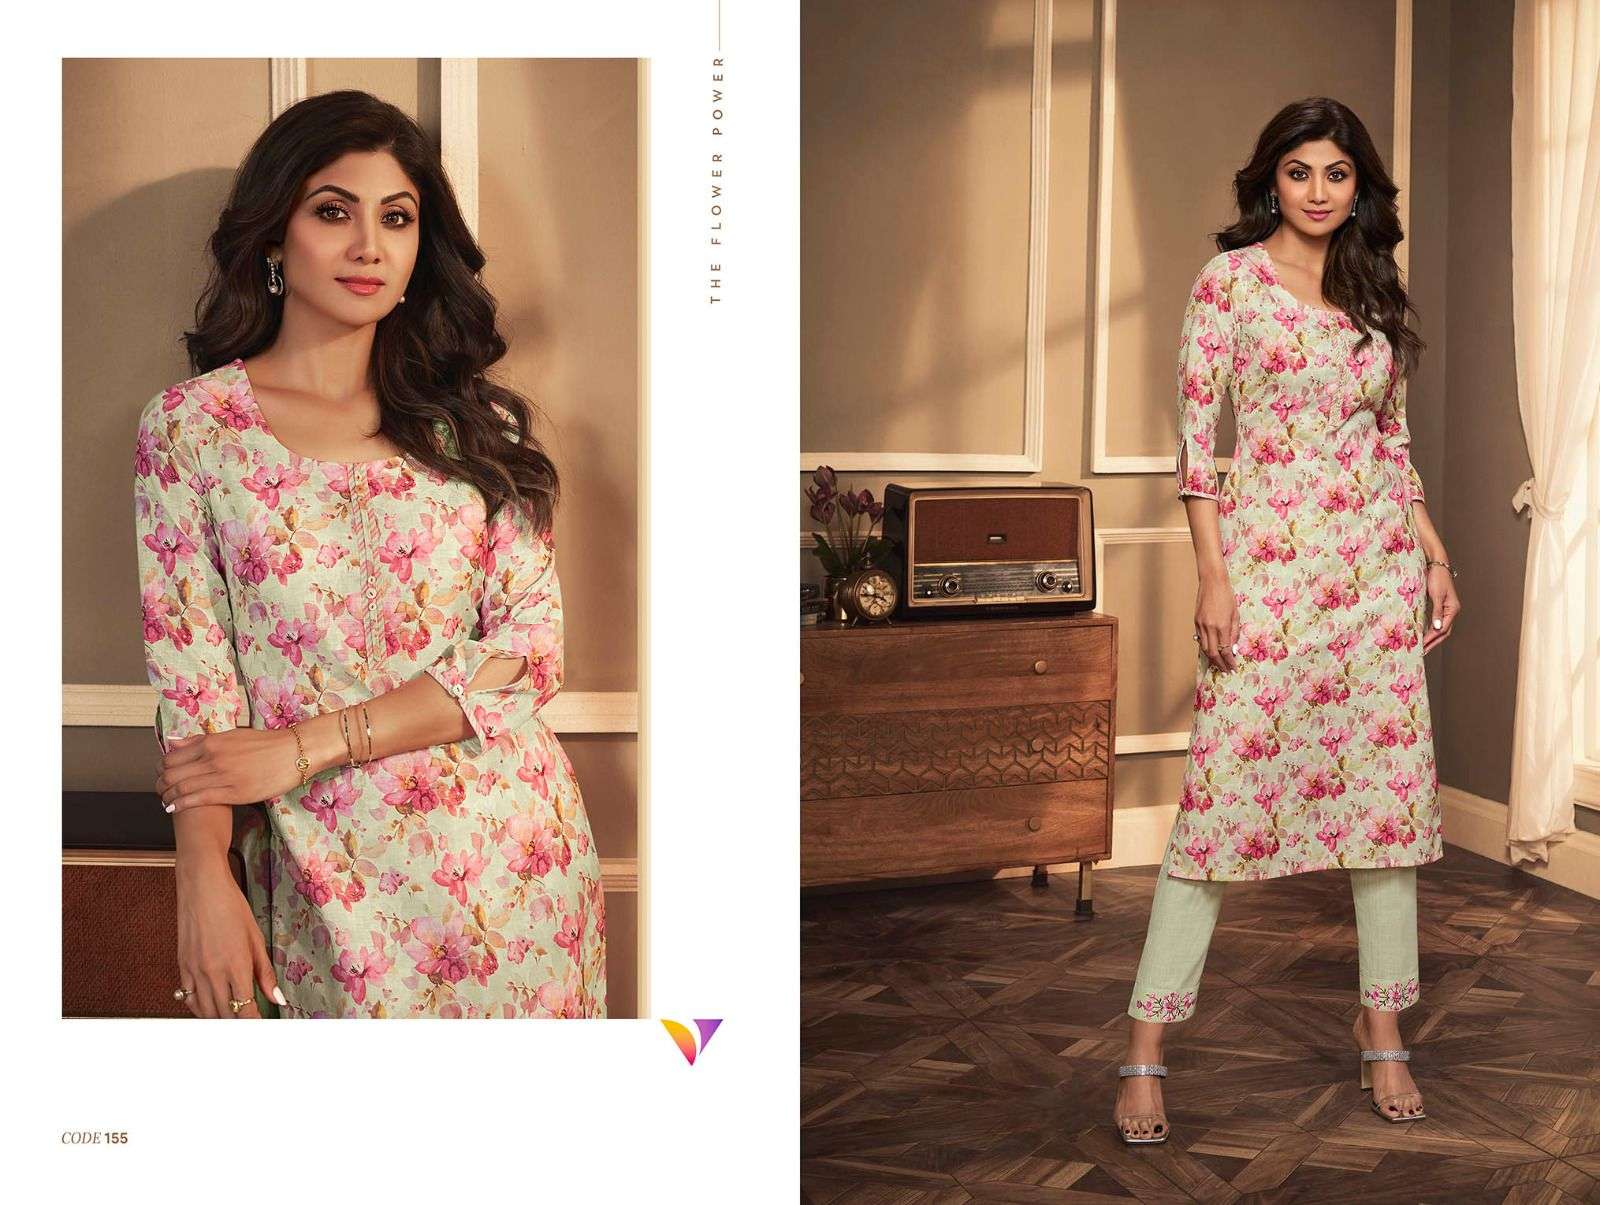 Shilpa By Vatsam 151 To 157 Series Designer Stylish Fancy Colorful Beautiful Party Wear & Ethnic Wear Collection Linen Kurtis With Bottom At Wholesale Price